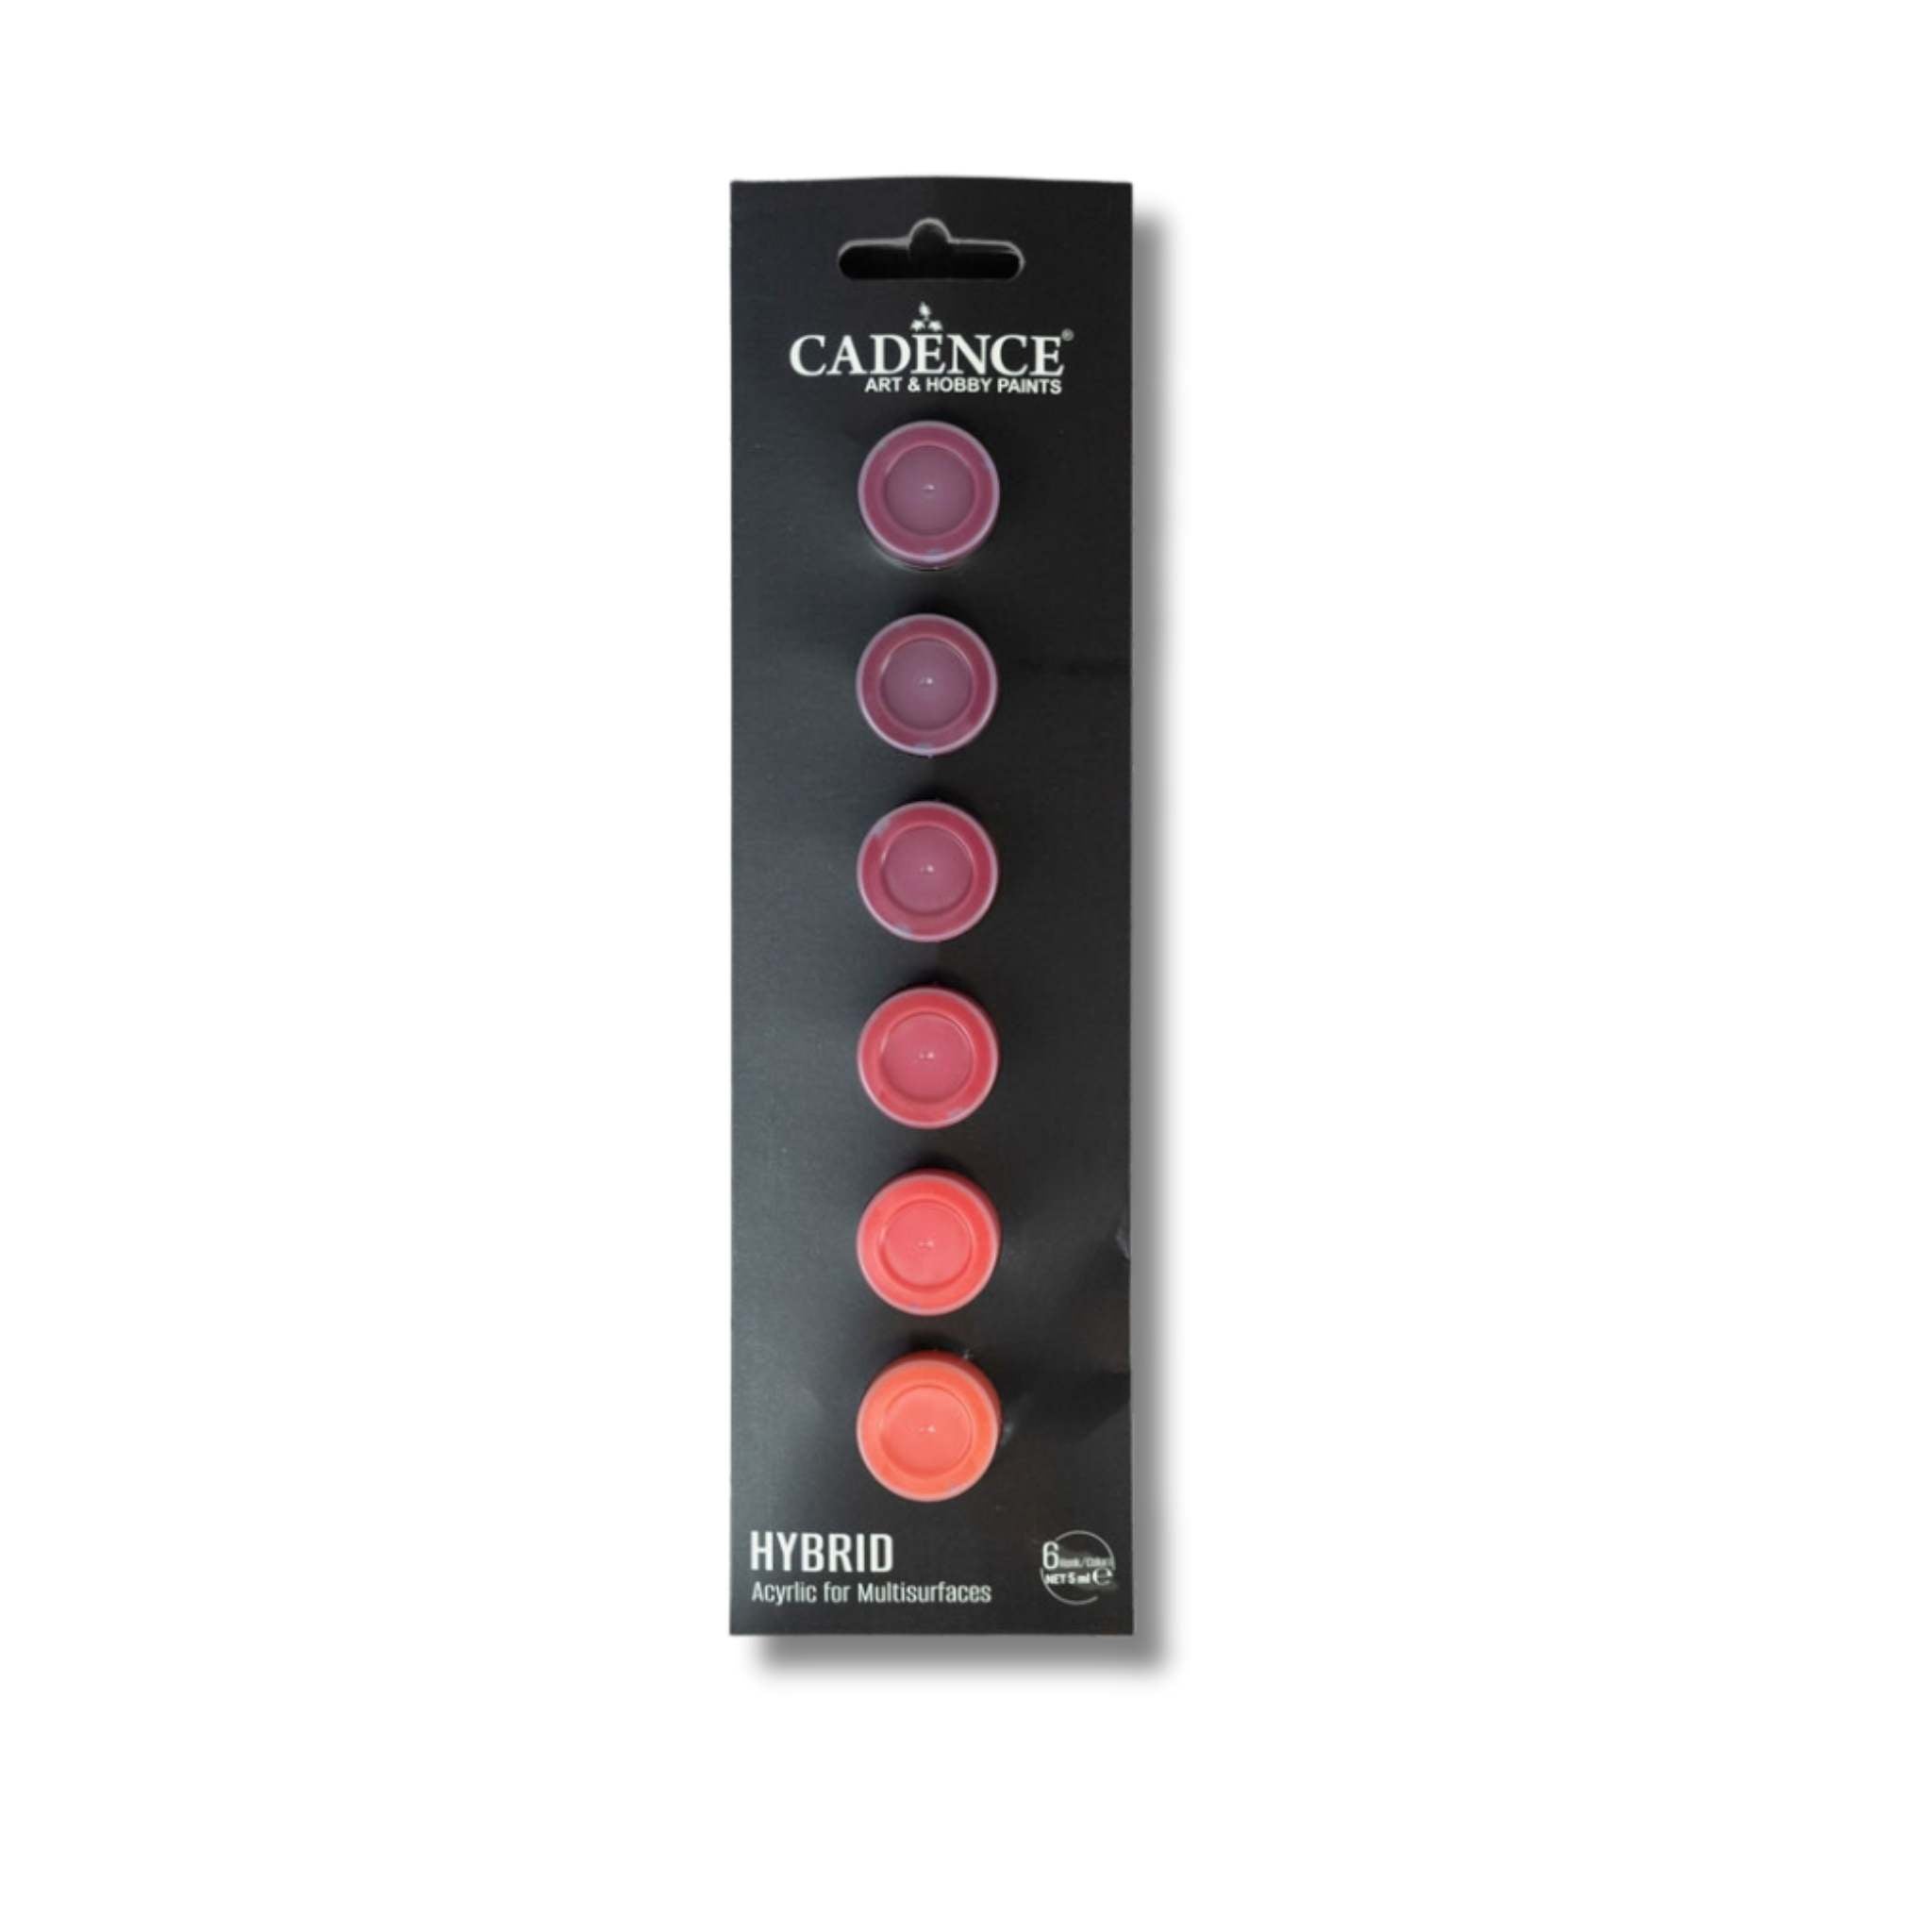 Opaque paints taster strip of 6 colours in warm plums and oranges for painting on leather and other surfaces